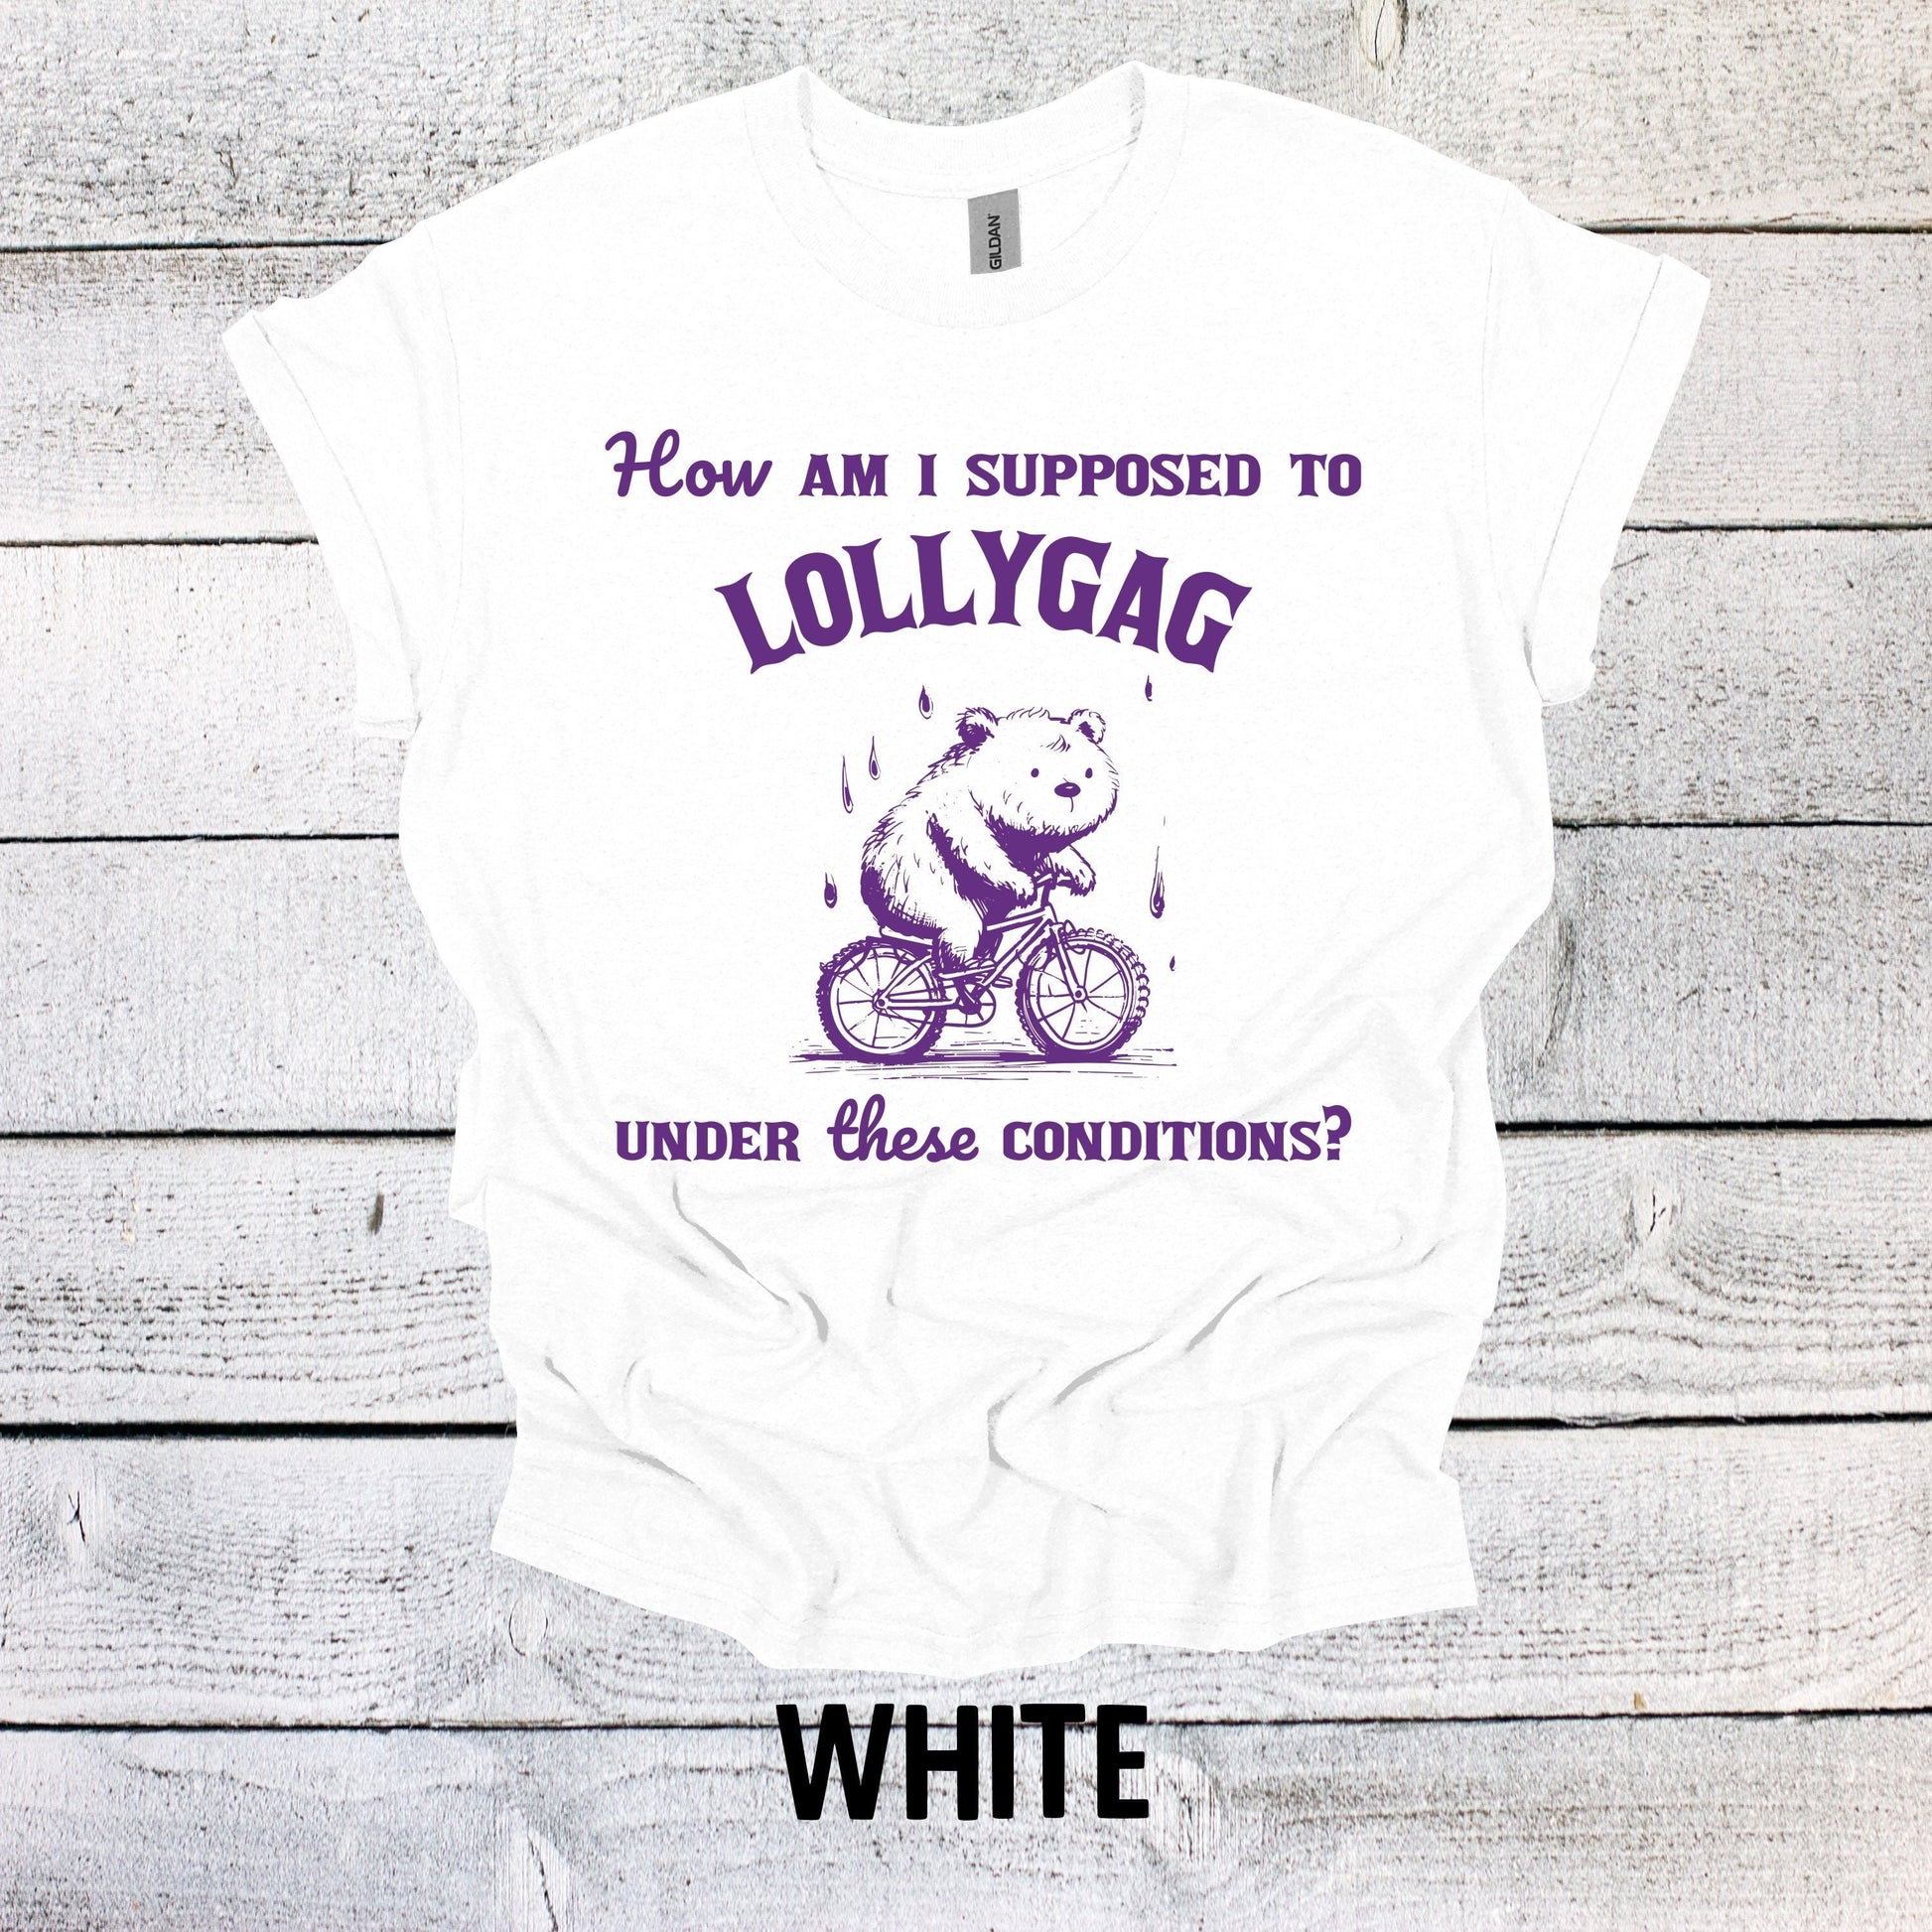 How am I Supposed to Lollygag under these Conditions Shirt Graphic Shirt Adult Vintage Funny Shirt Nostalgia Cotton Shirt Minimalist Shirt